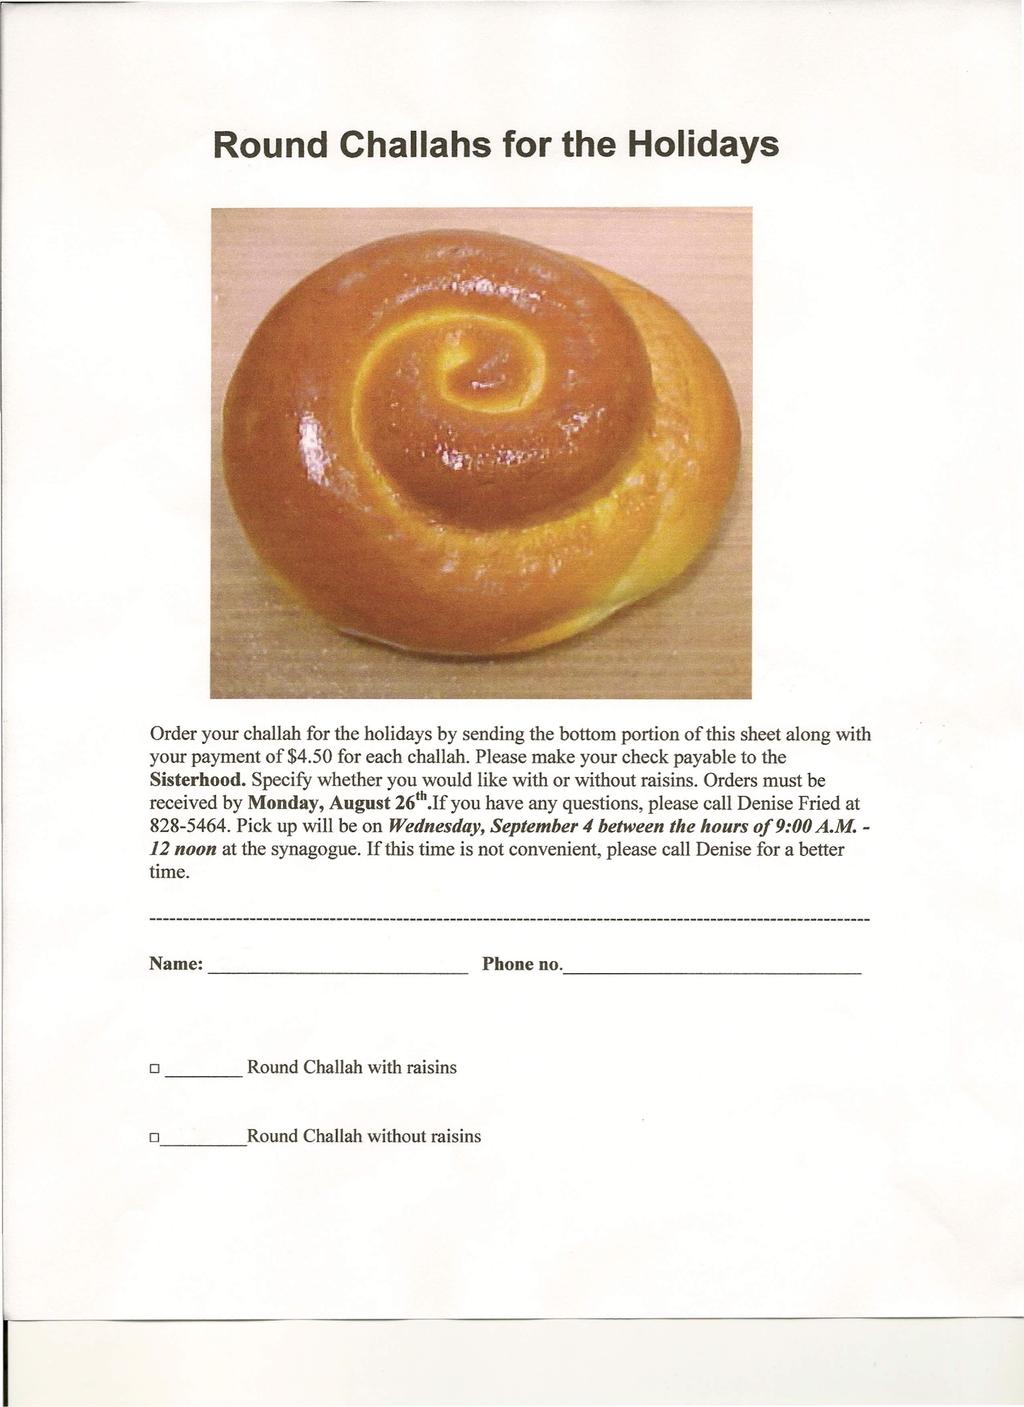 Round Challahs for the Holidays Order your challah for the holidays by sending the bottom portion of this sheet along with your payment of $4.50 for each challah.